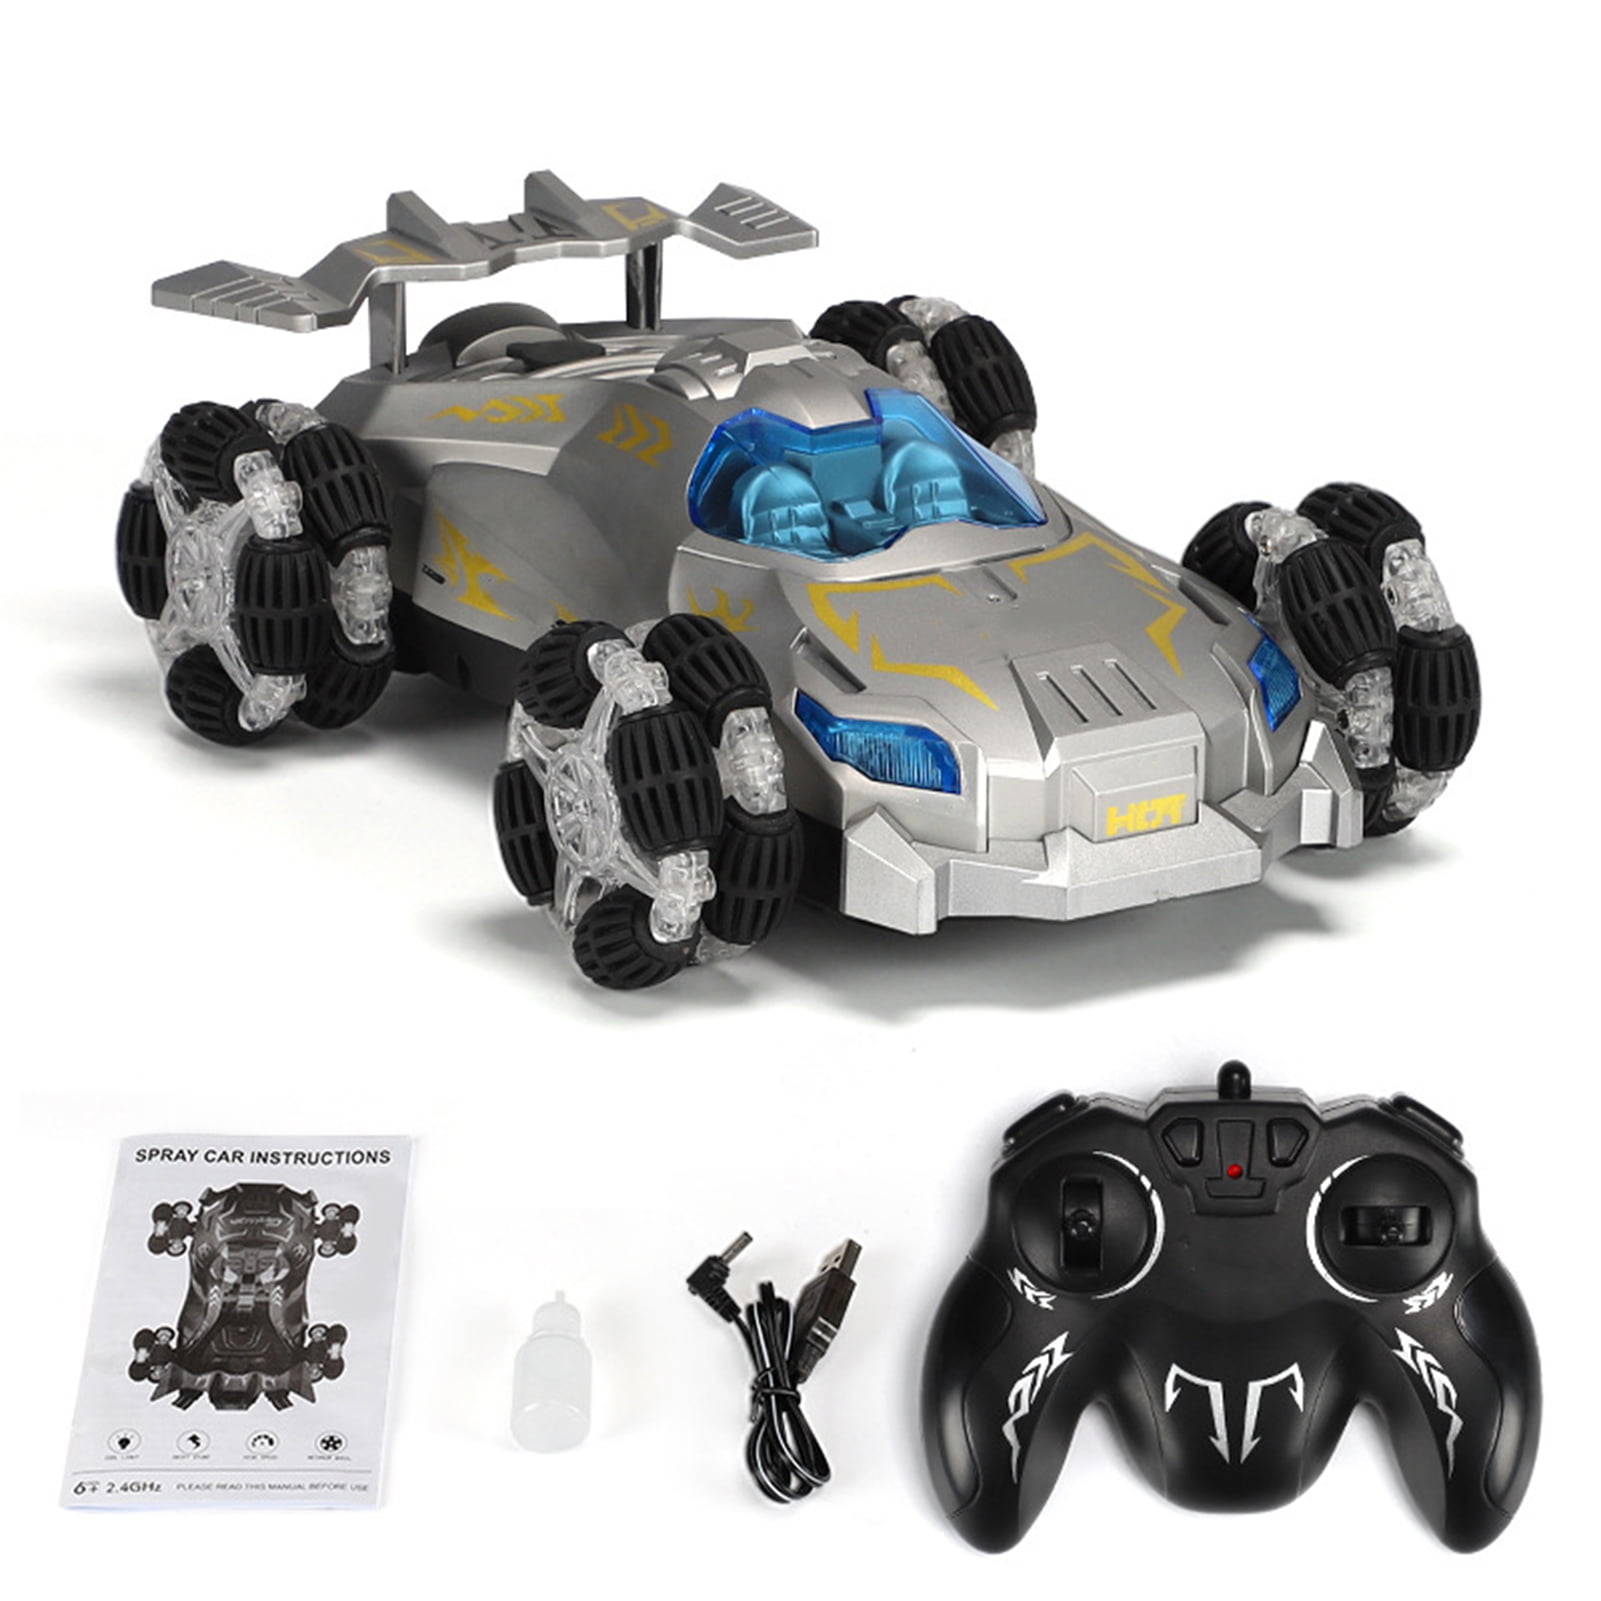 4WD 1/16 RC Cars Off-Road Crawler 2.4G Remote Control Car Toy Gift for Kids A0A9 